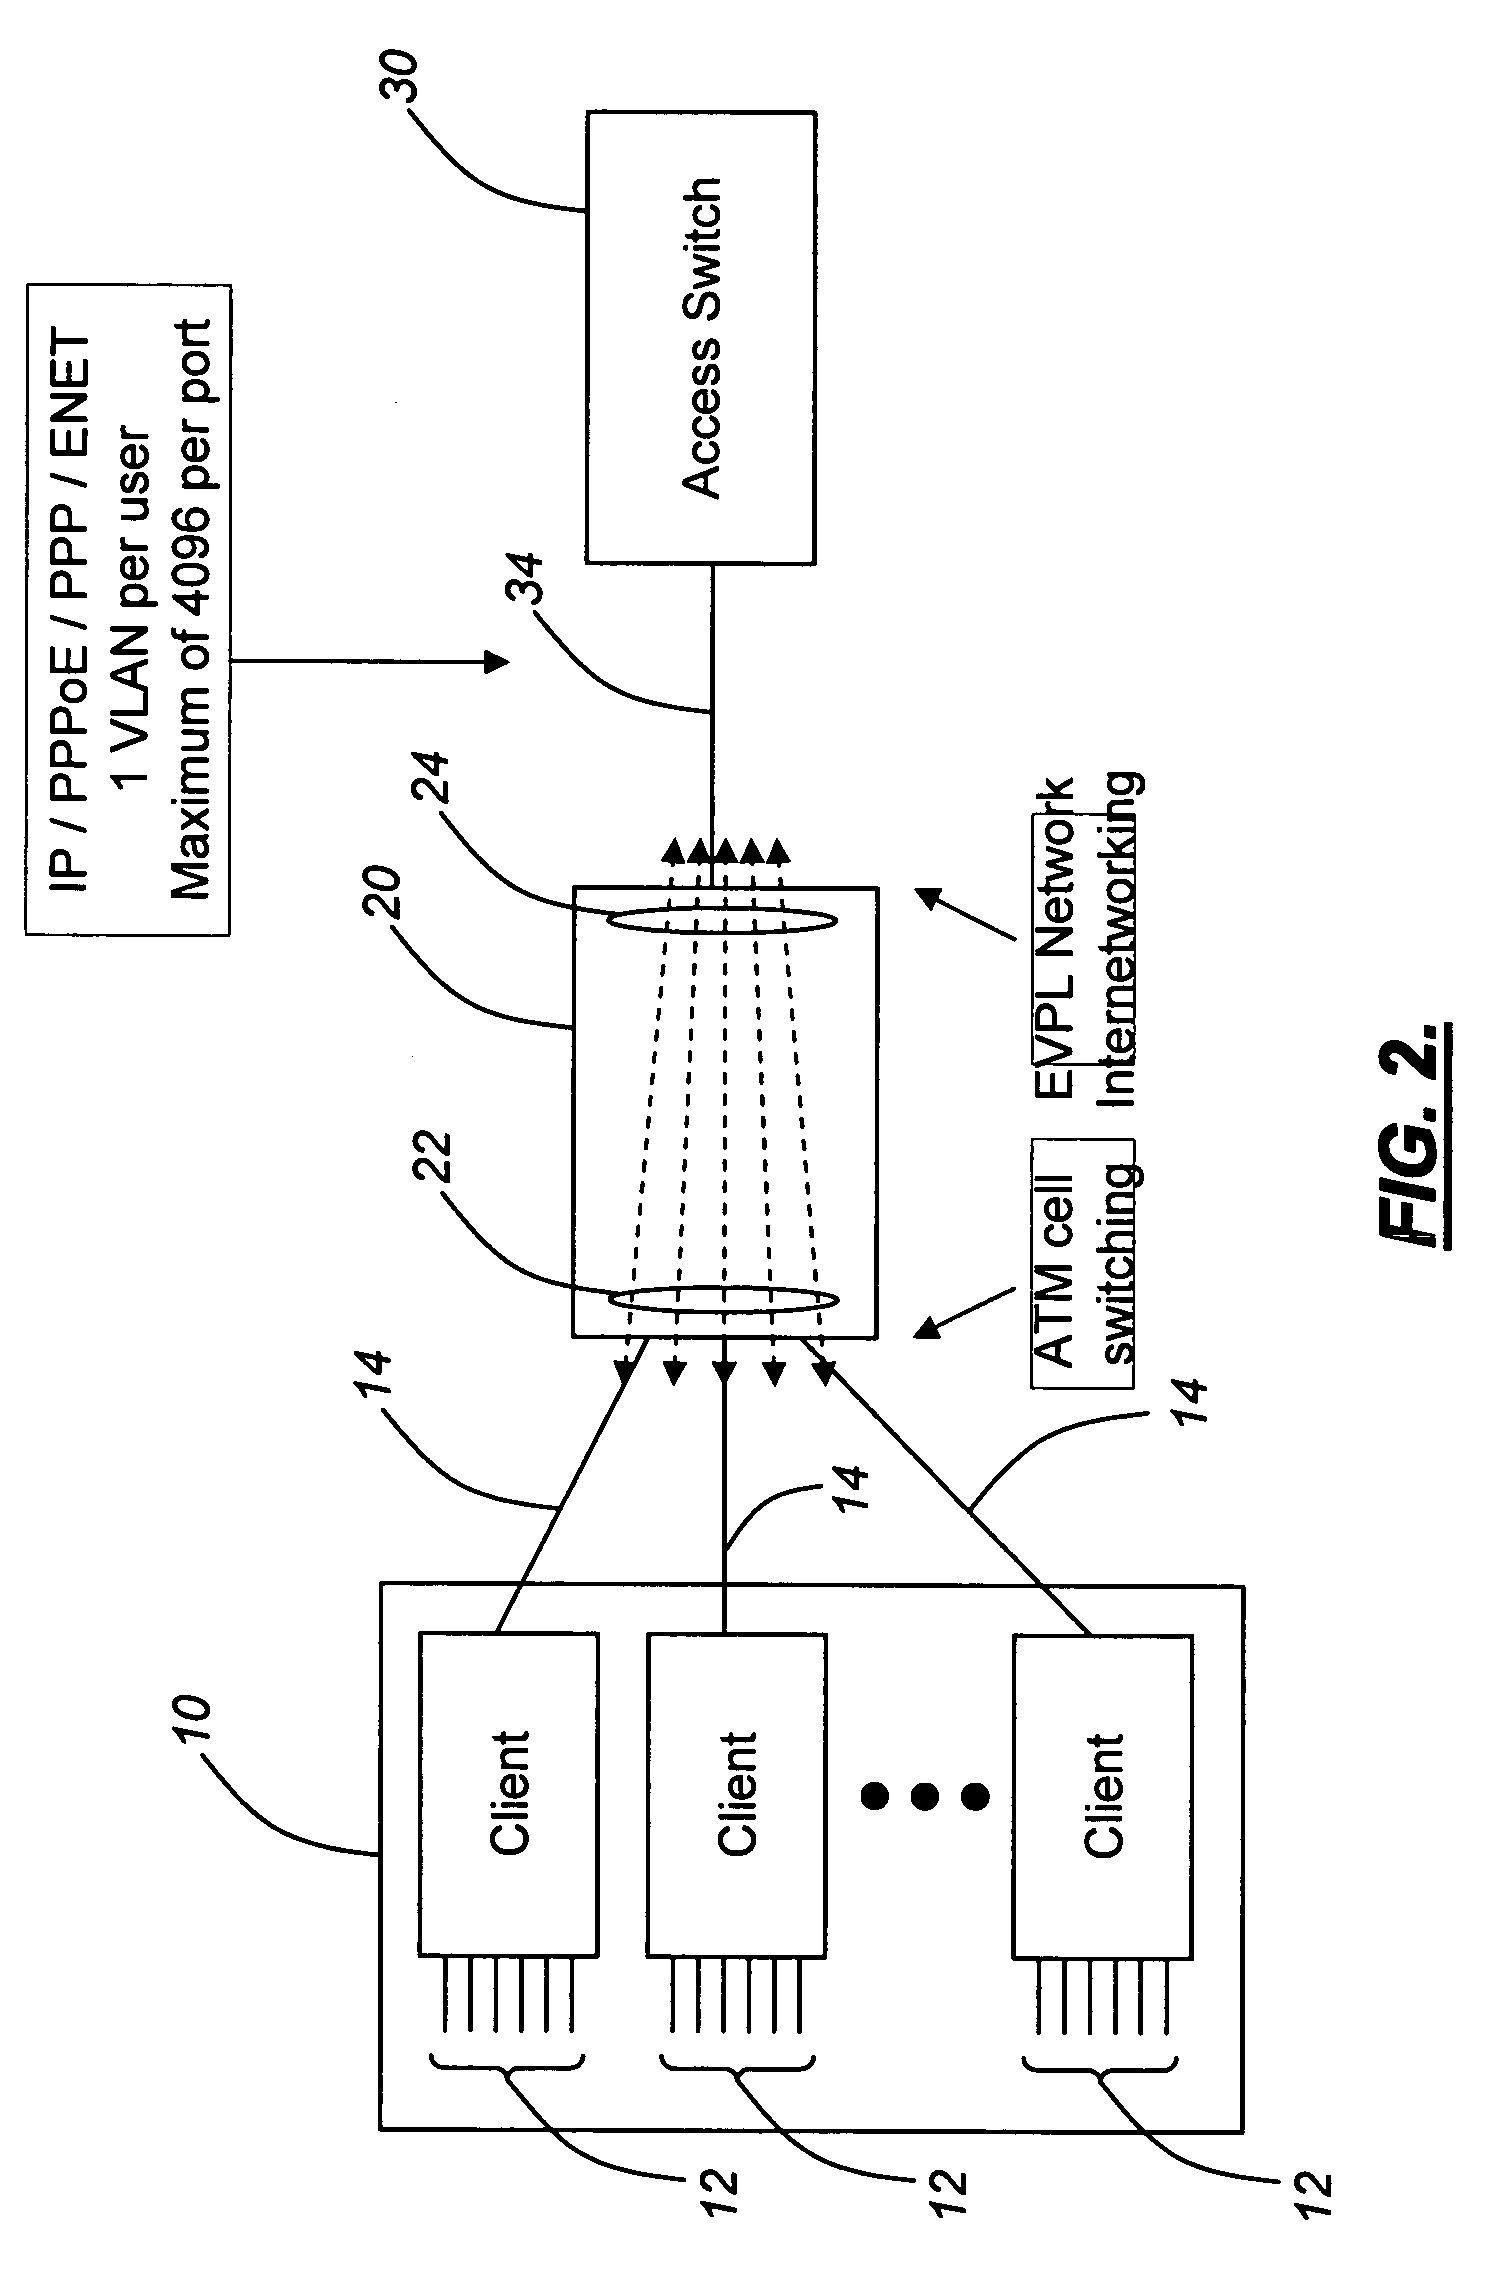 Methods and systems for packet aggregation combining connection-oriented and connection-less techniques